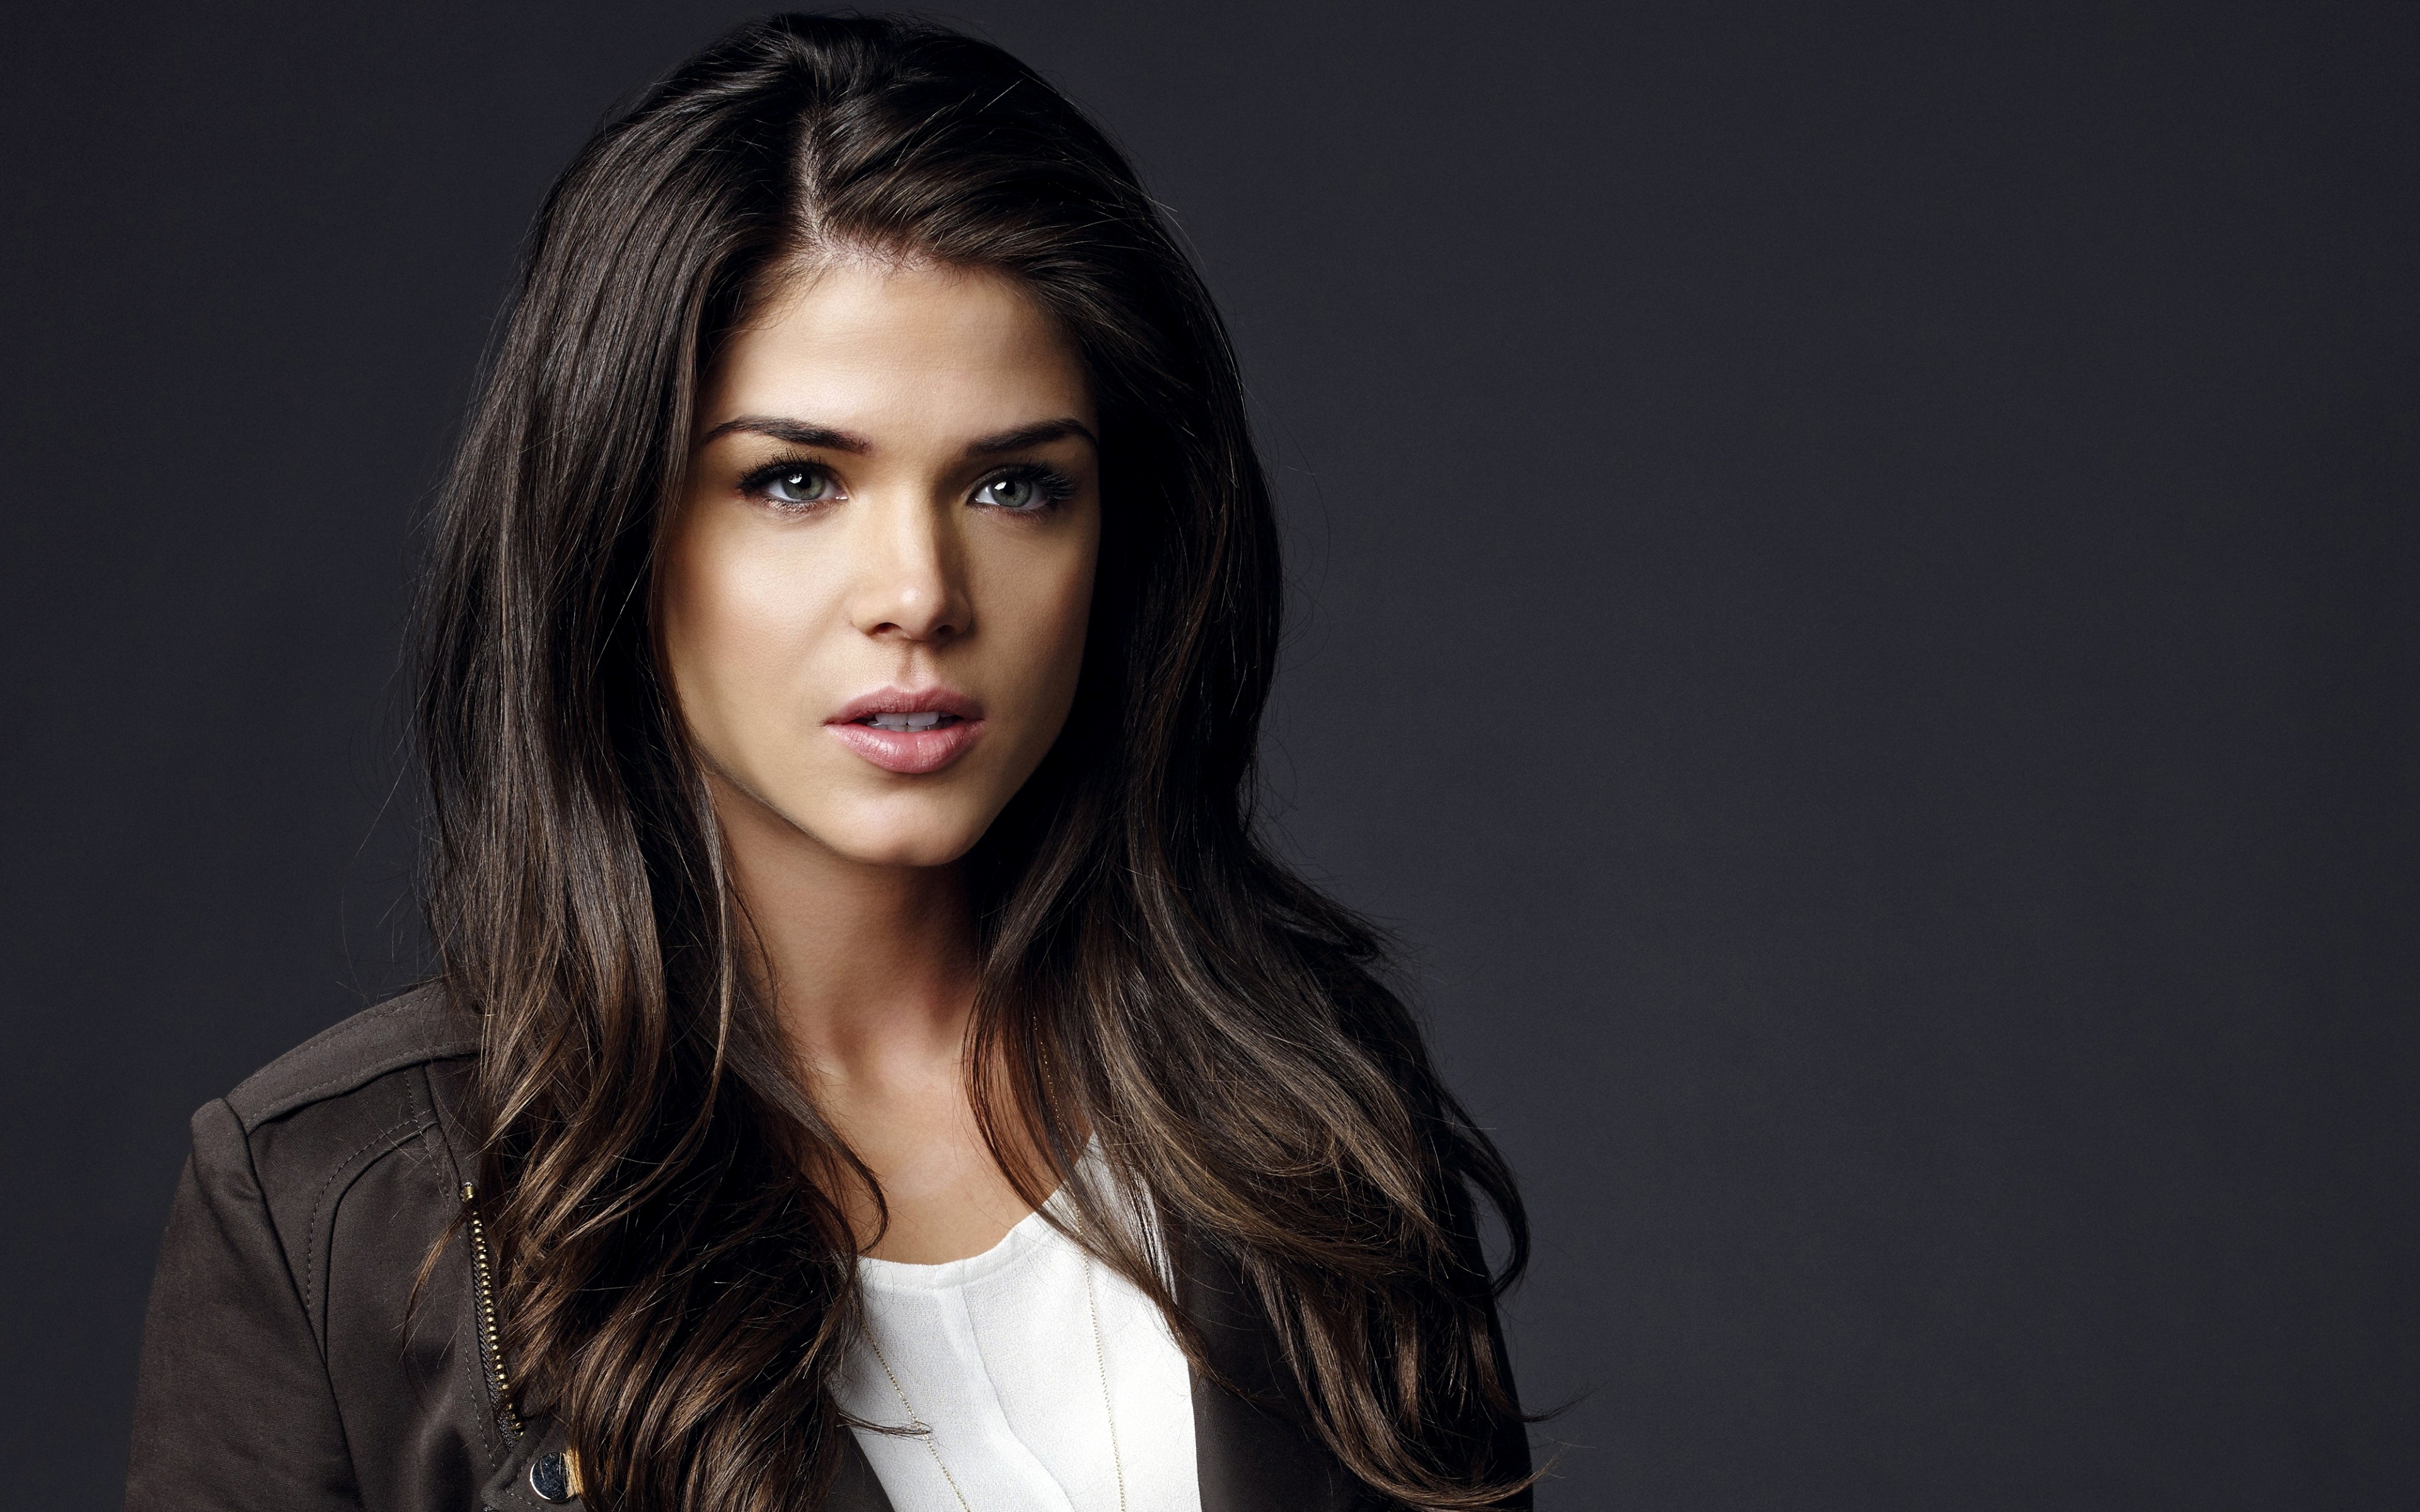 Marie Avgeropoulos Brunette Actress Photoshoot Girl 100072 3840x2400